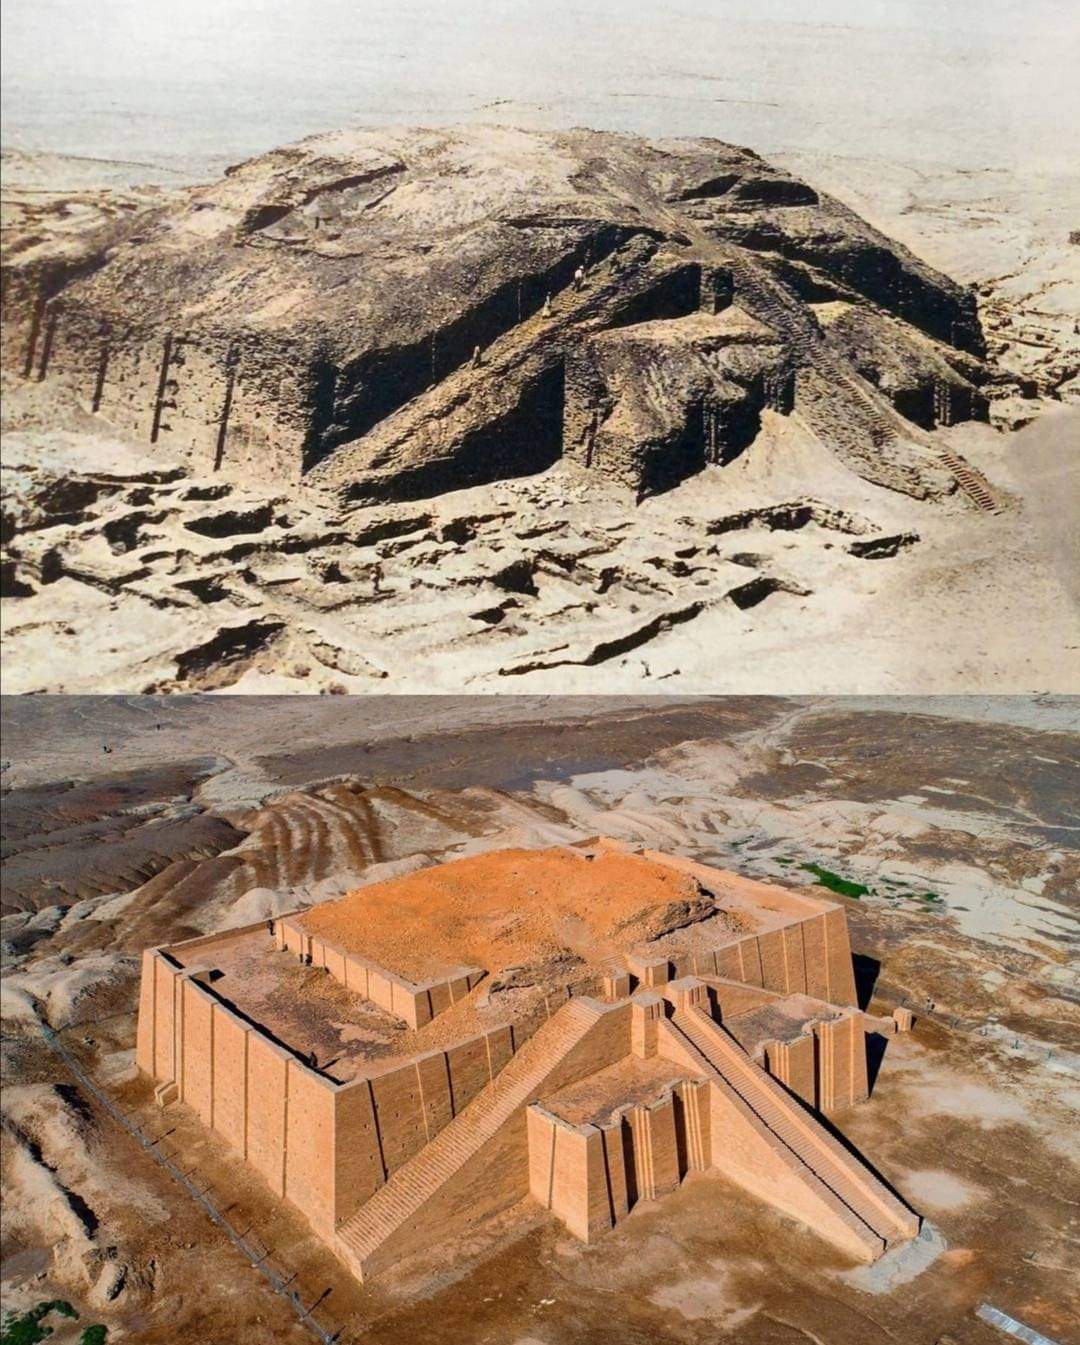 the appearance before and after the excavation of ancient ruins